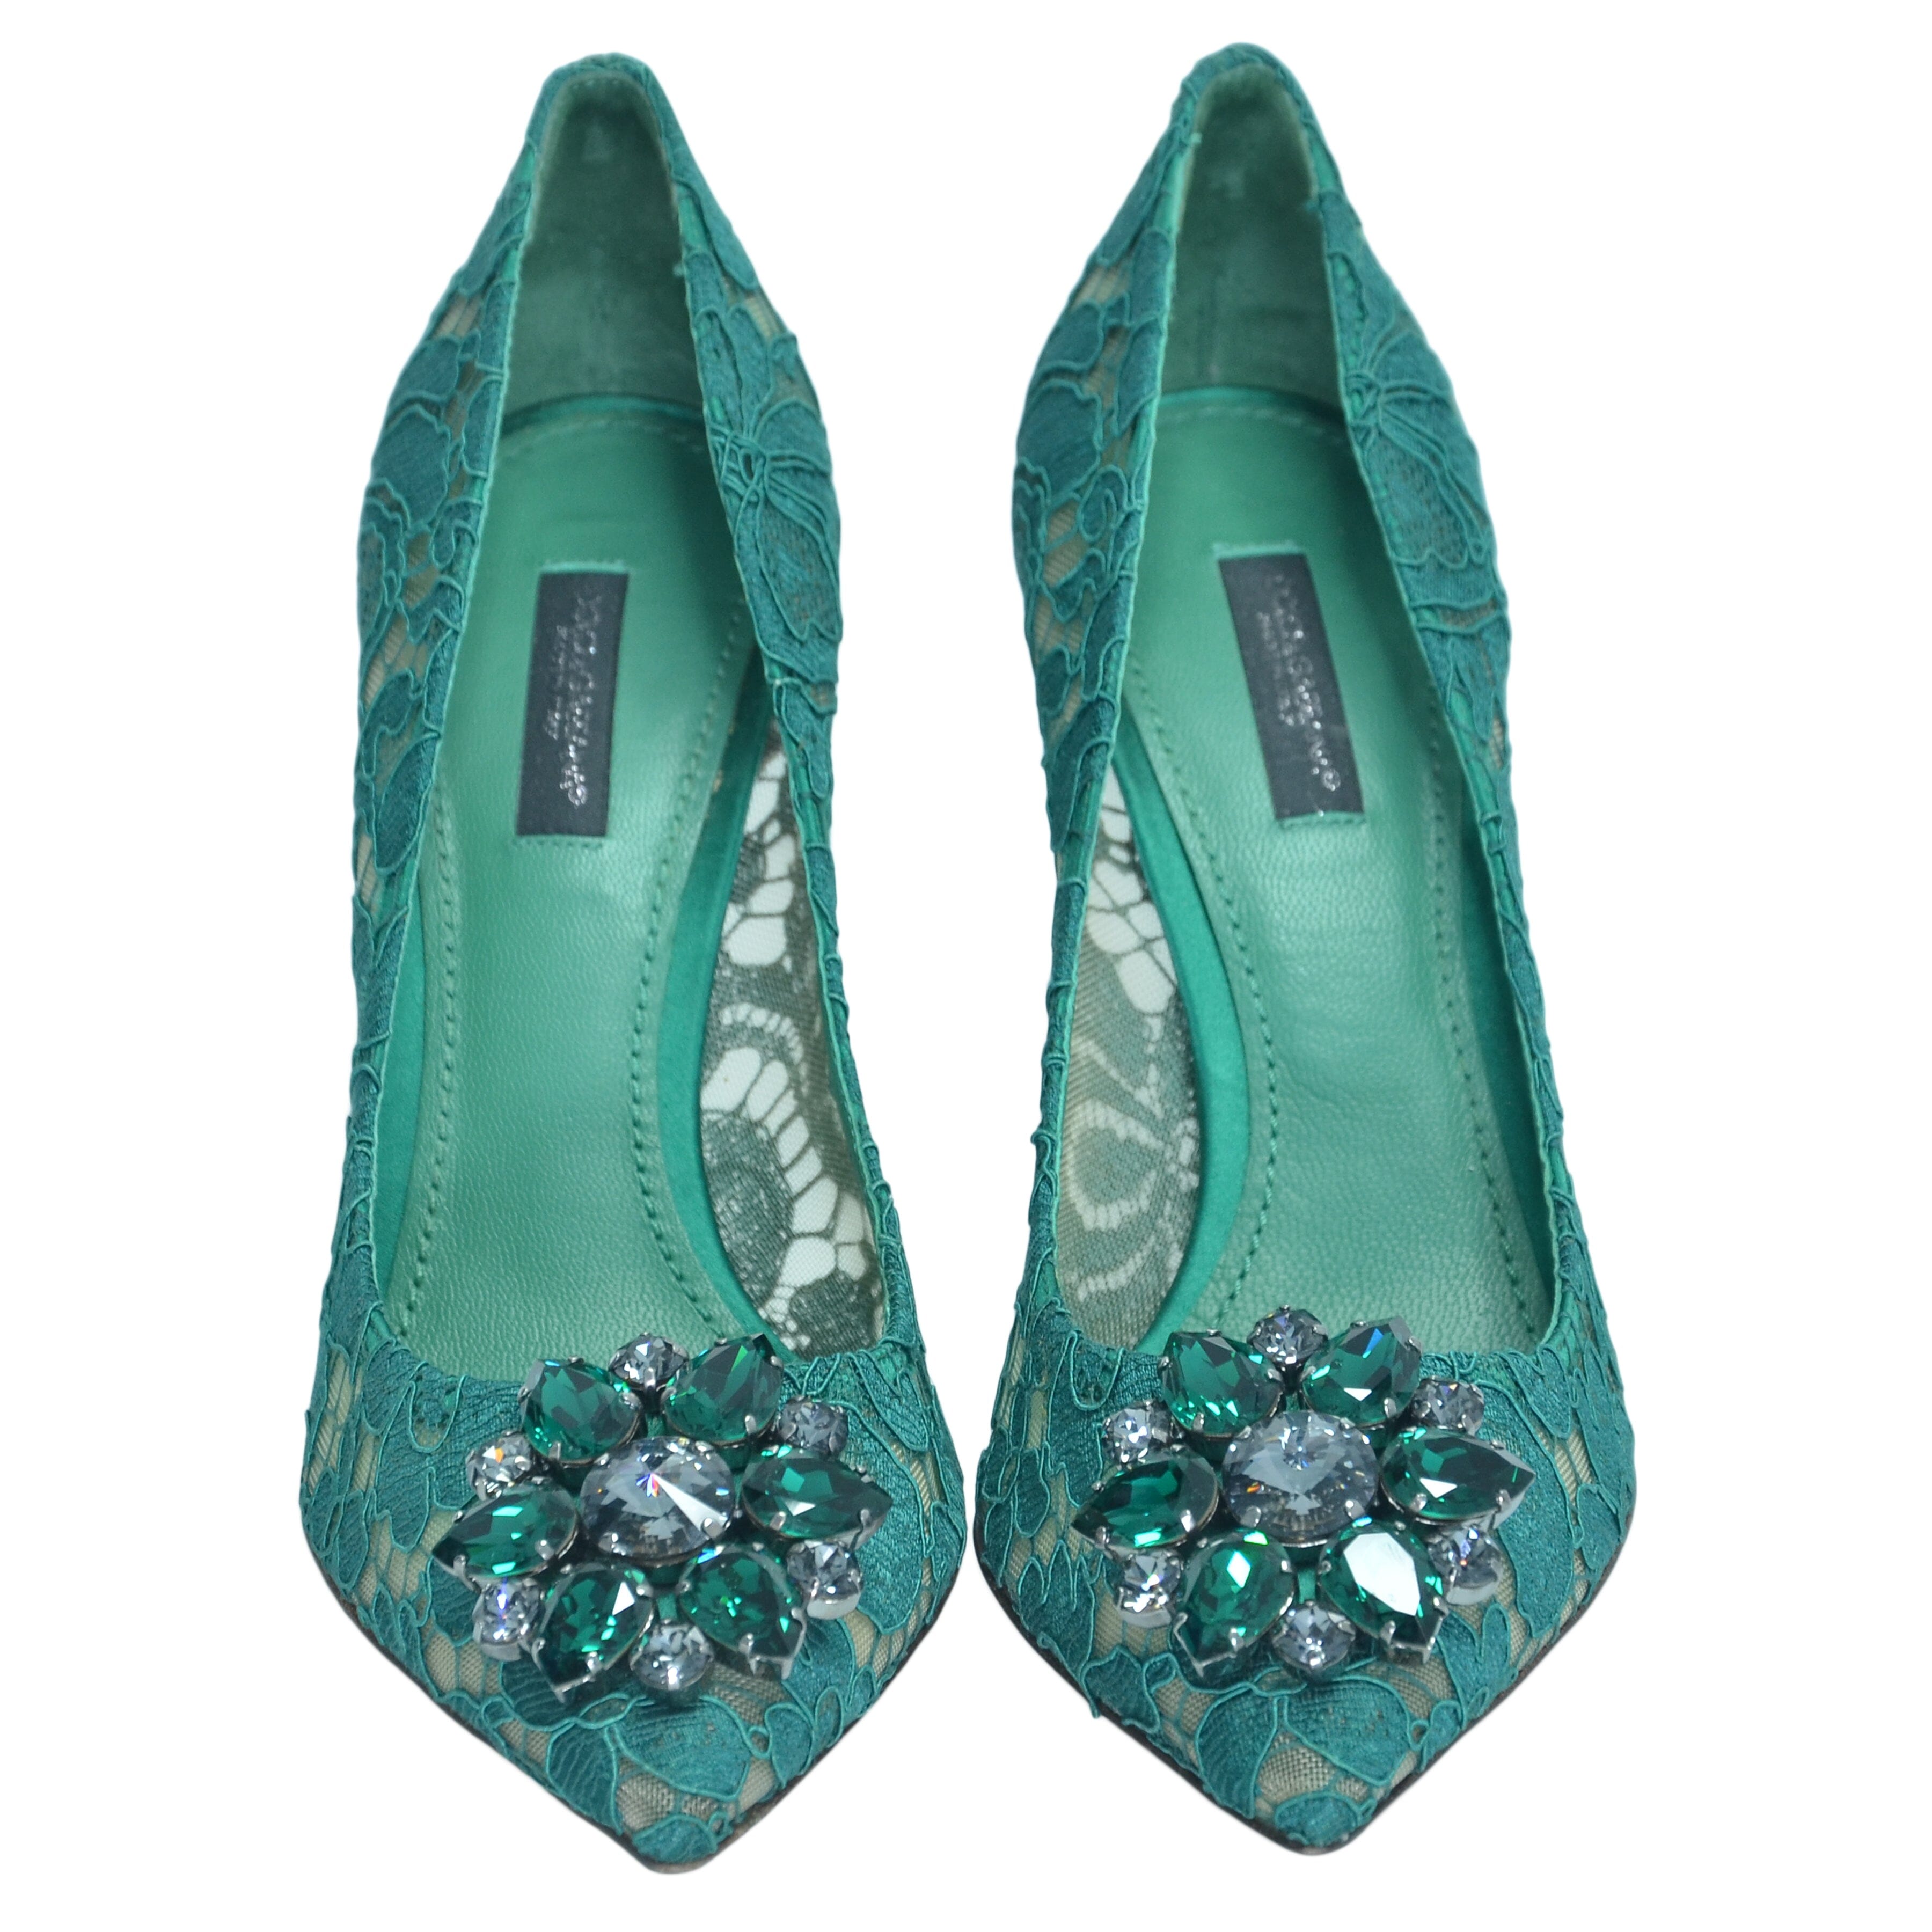 Green Lace Bellucci 90 Crystal Embellished Pumps Shoes Dolce & Gabbana 